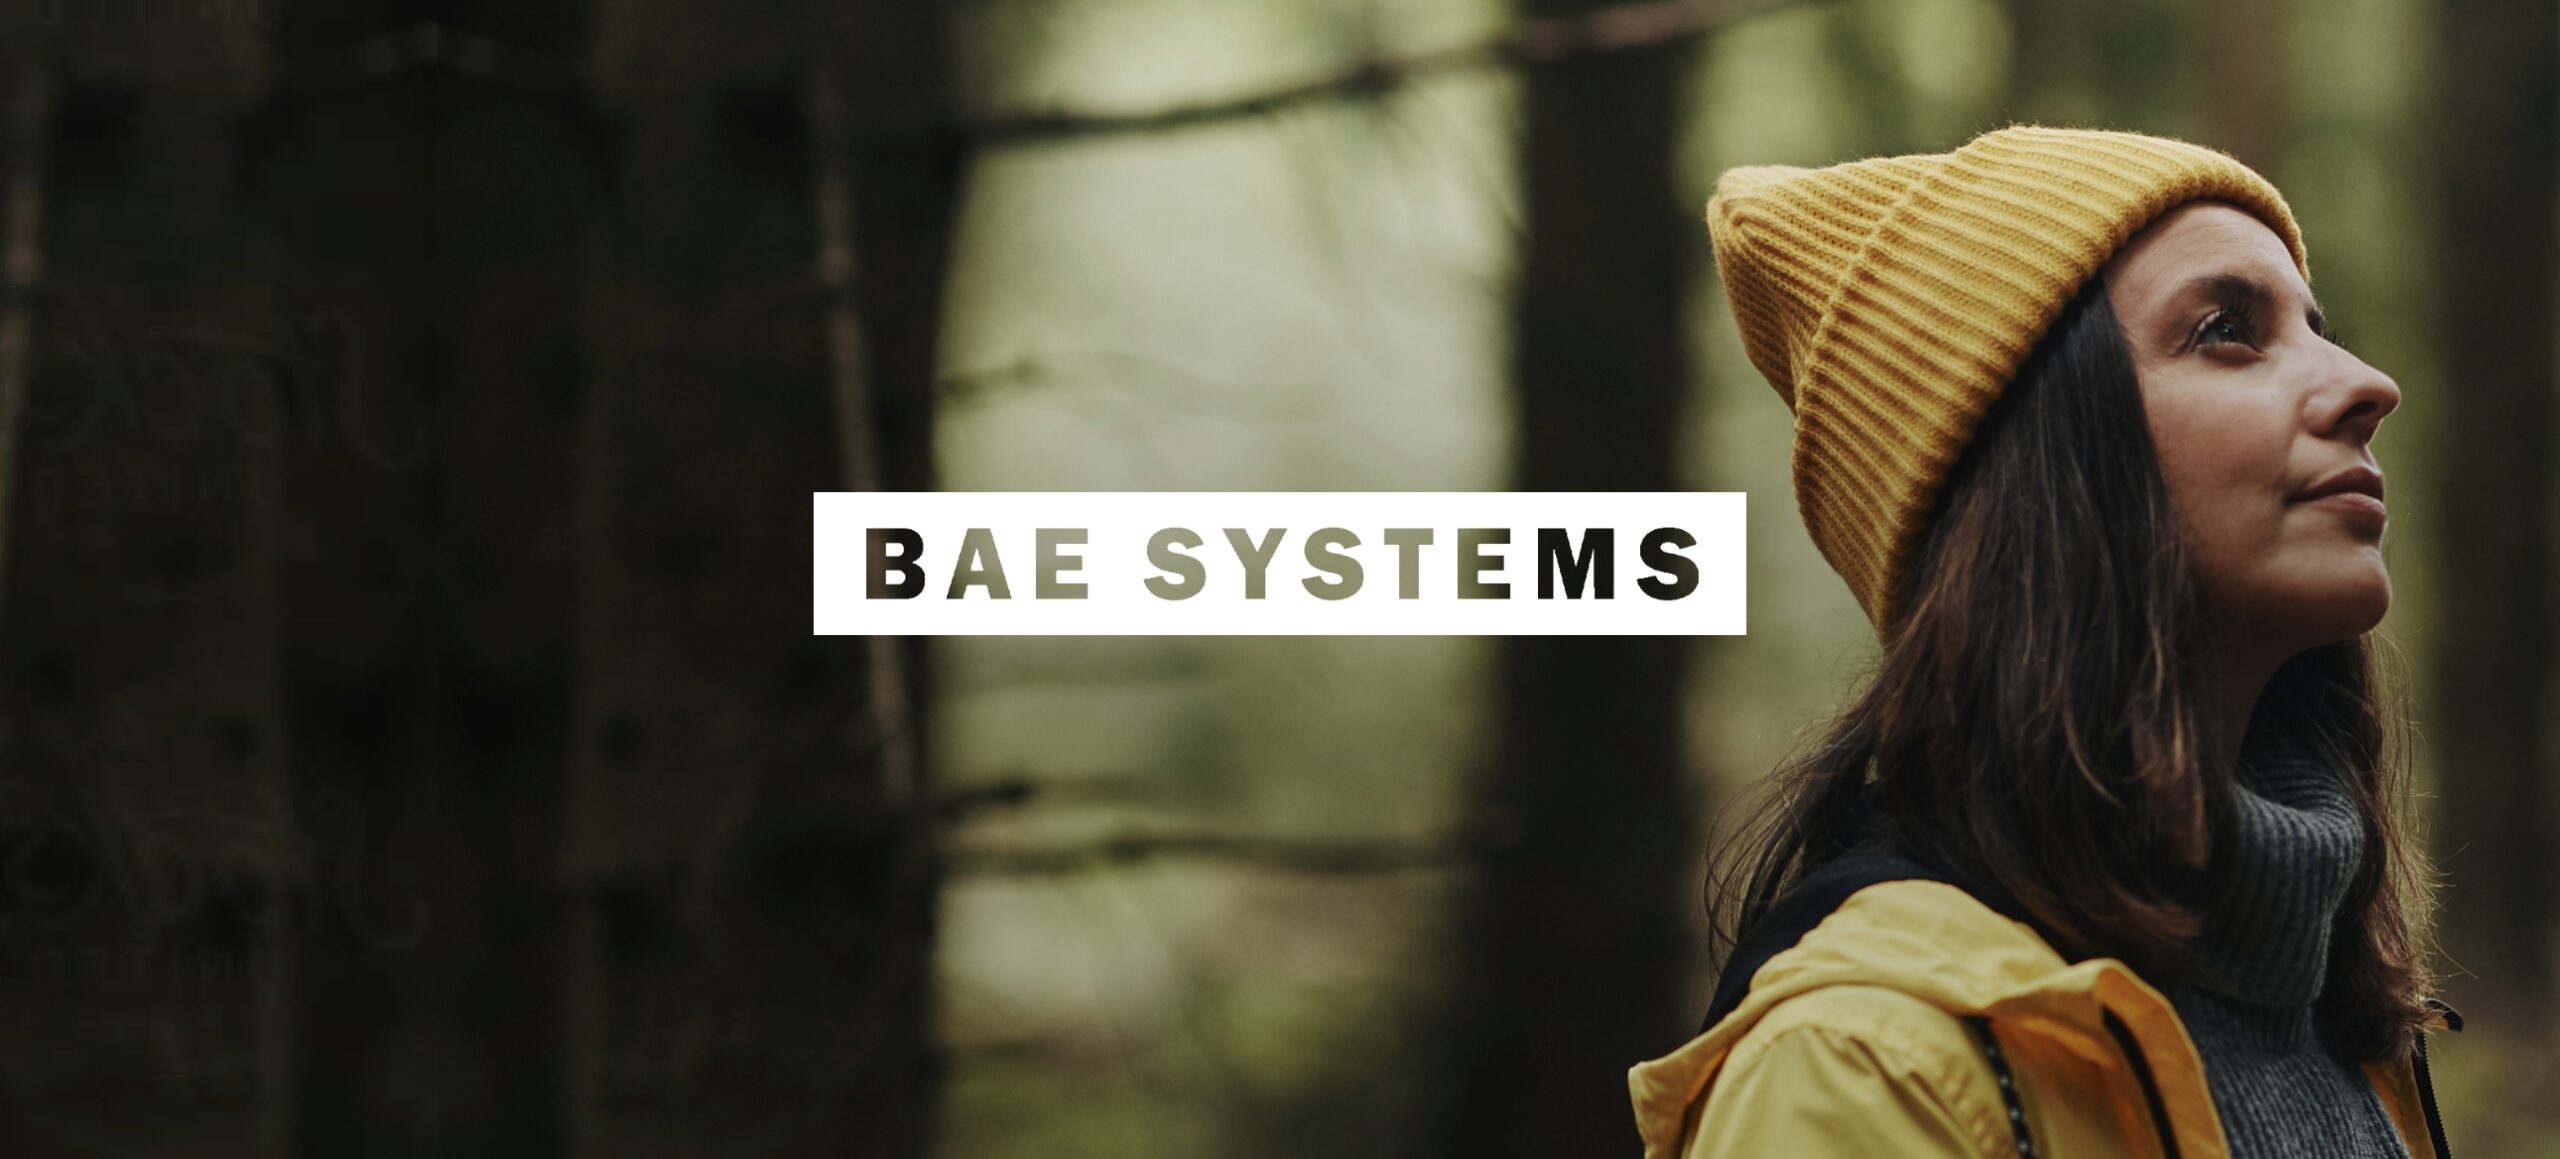 Along for the journey with BAE Systems